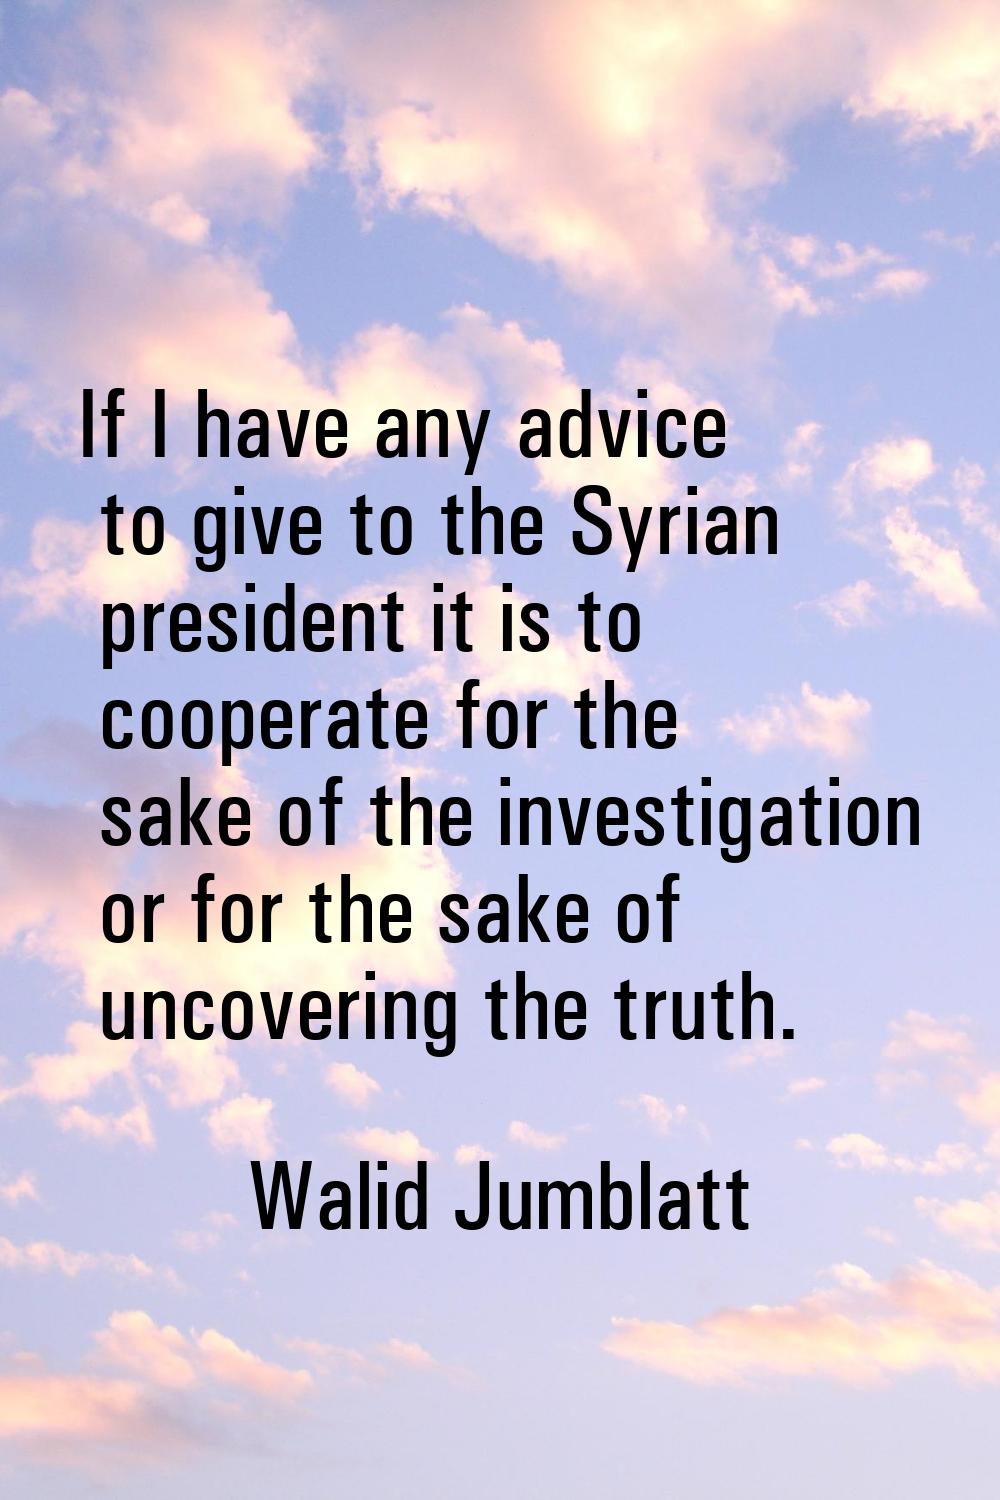 If I have any advice to give to the Syrian president it is to cooperate for the sake of the investi